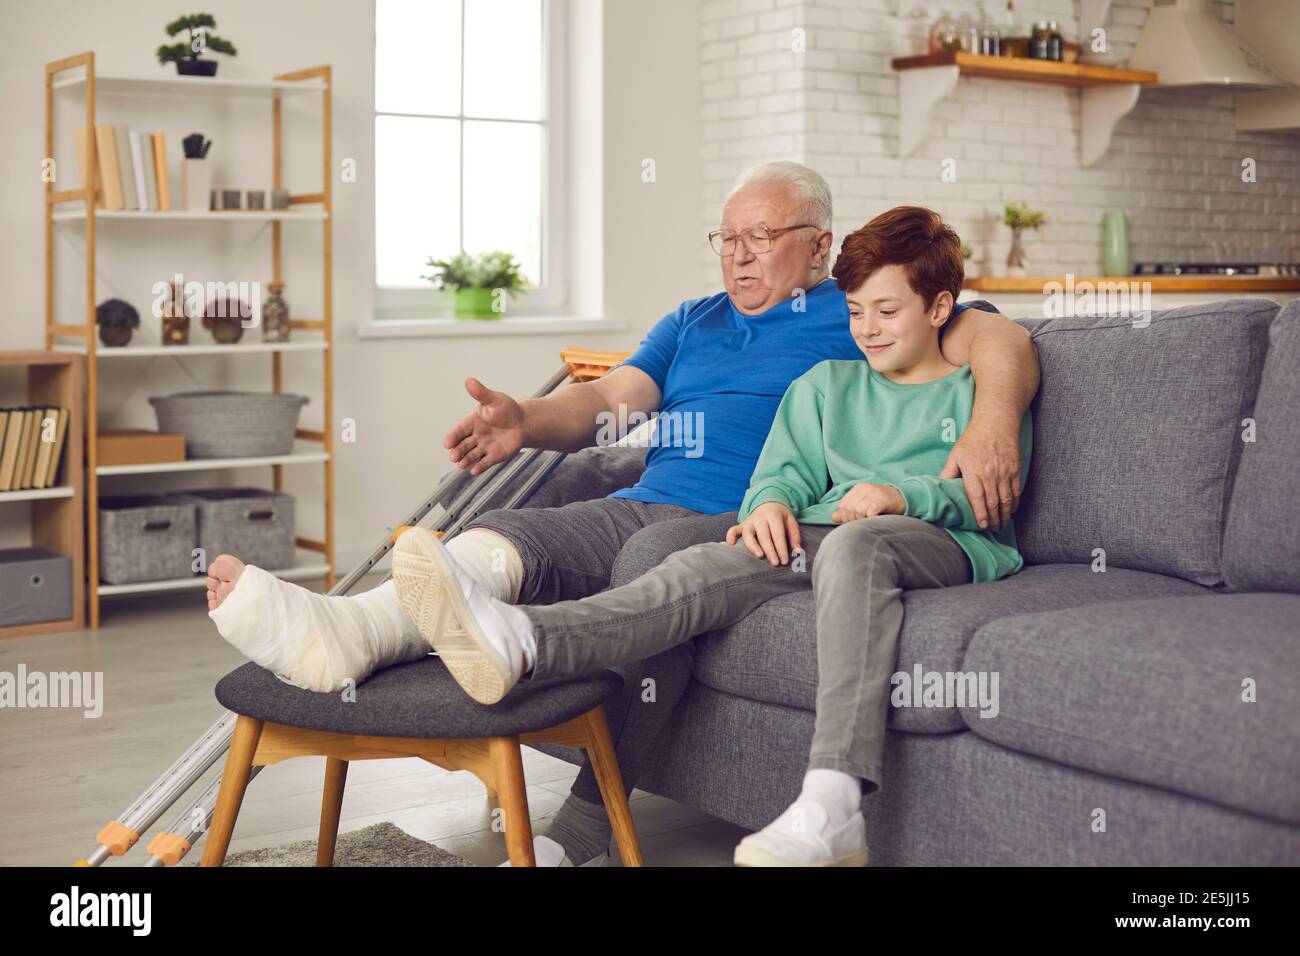 Older man with a broken leg in a plaster cast and tells grandson the story of how he broke ankle. Stock Photo